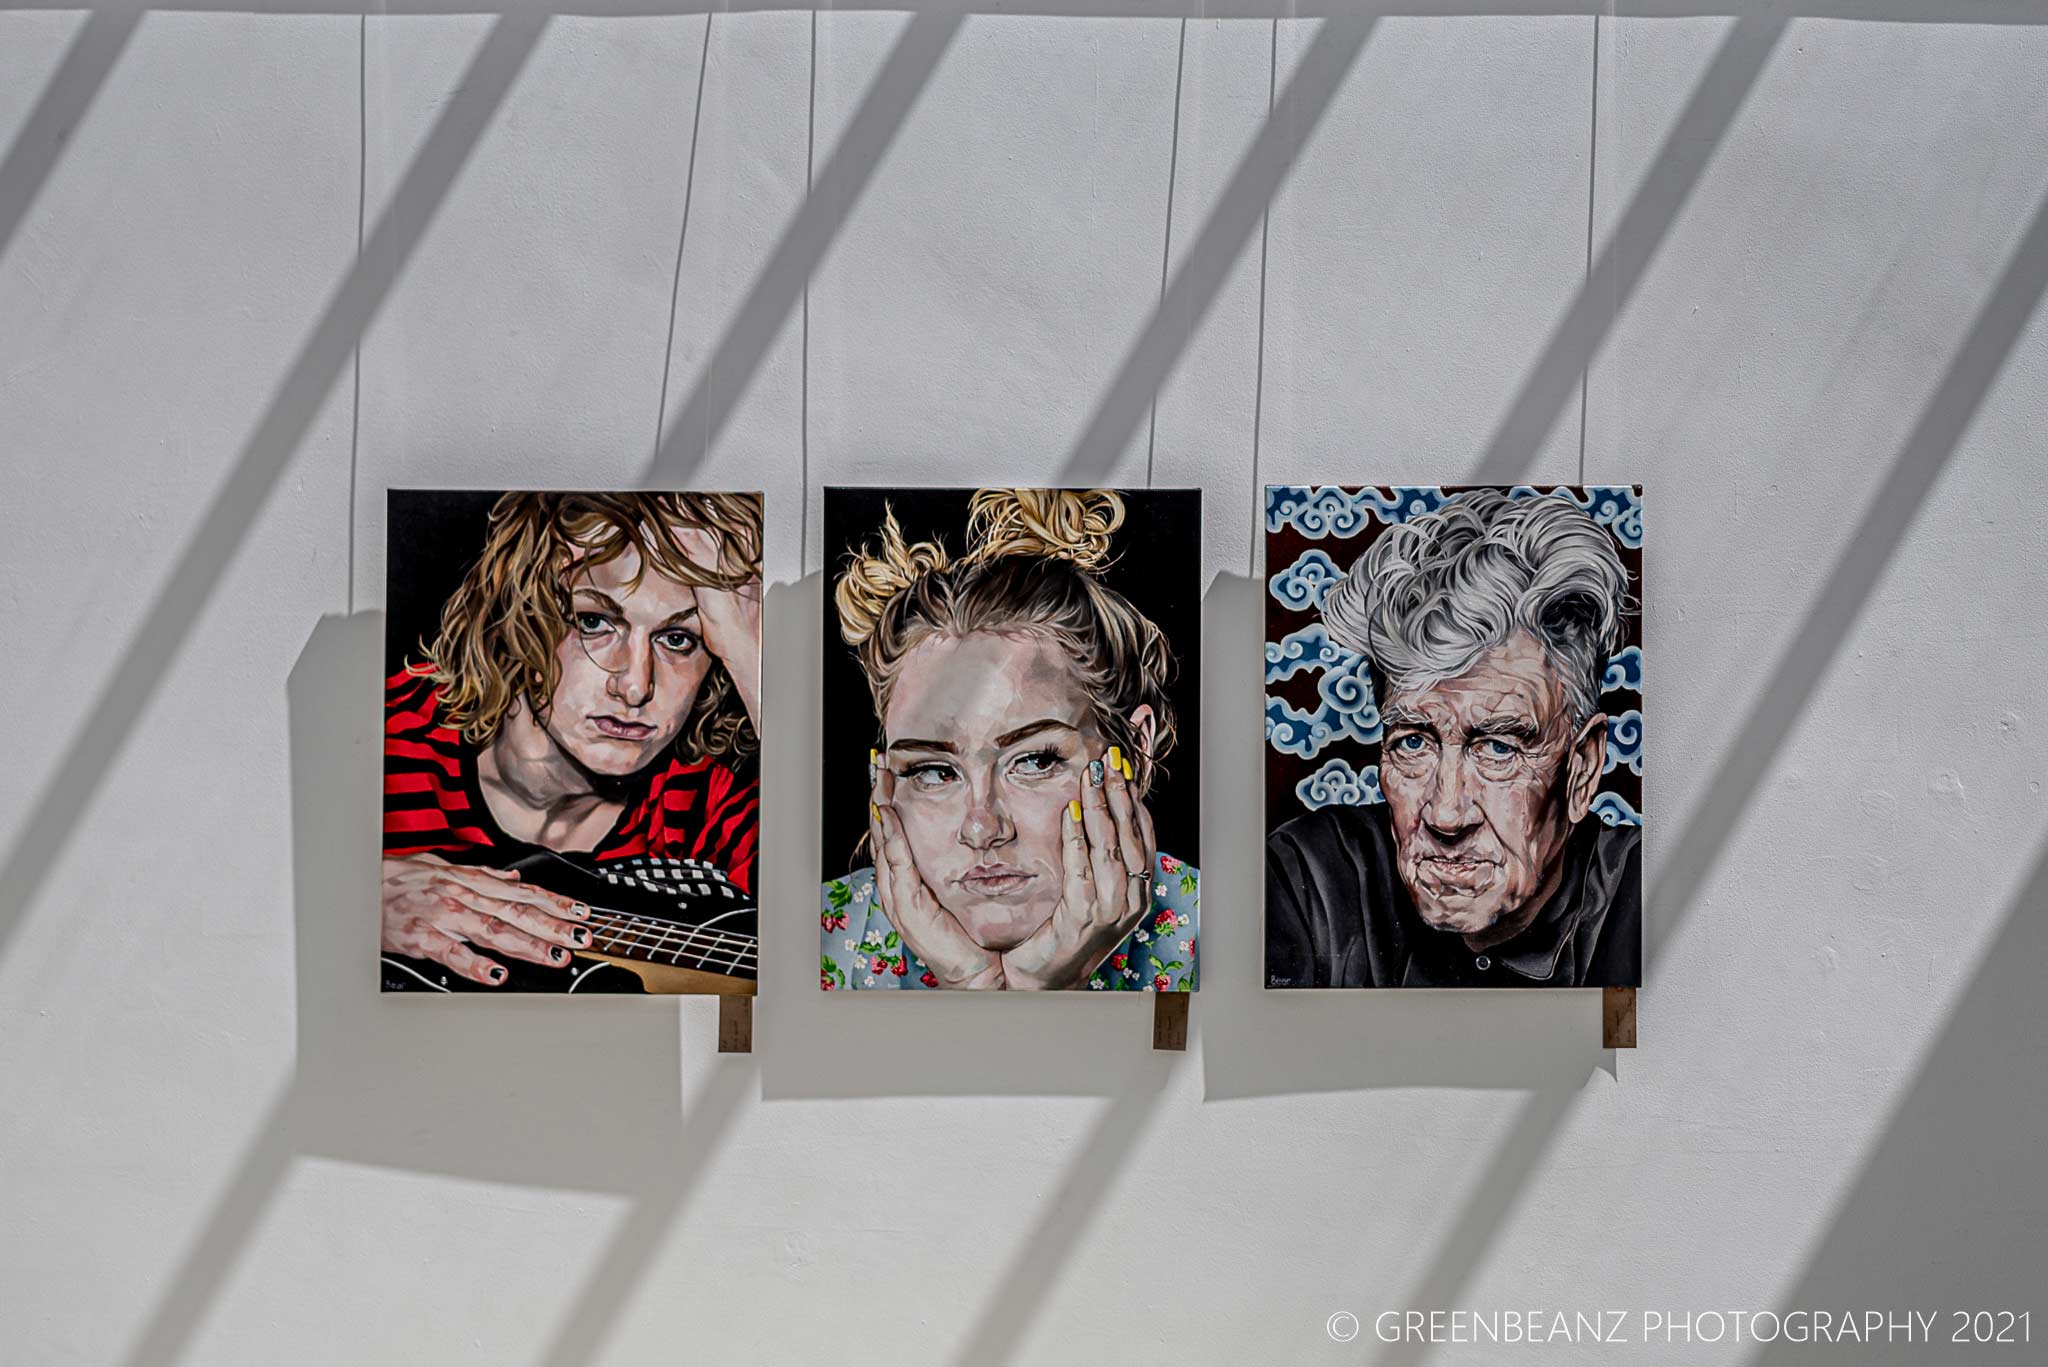 Jo Beer's portraits od David Lynch and others